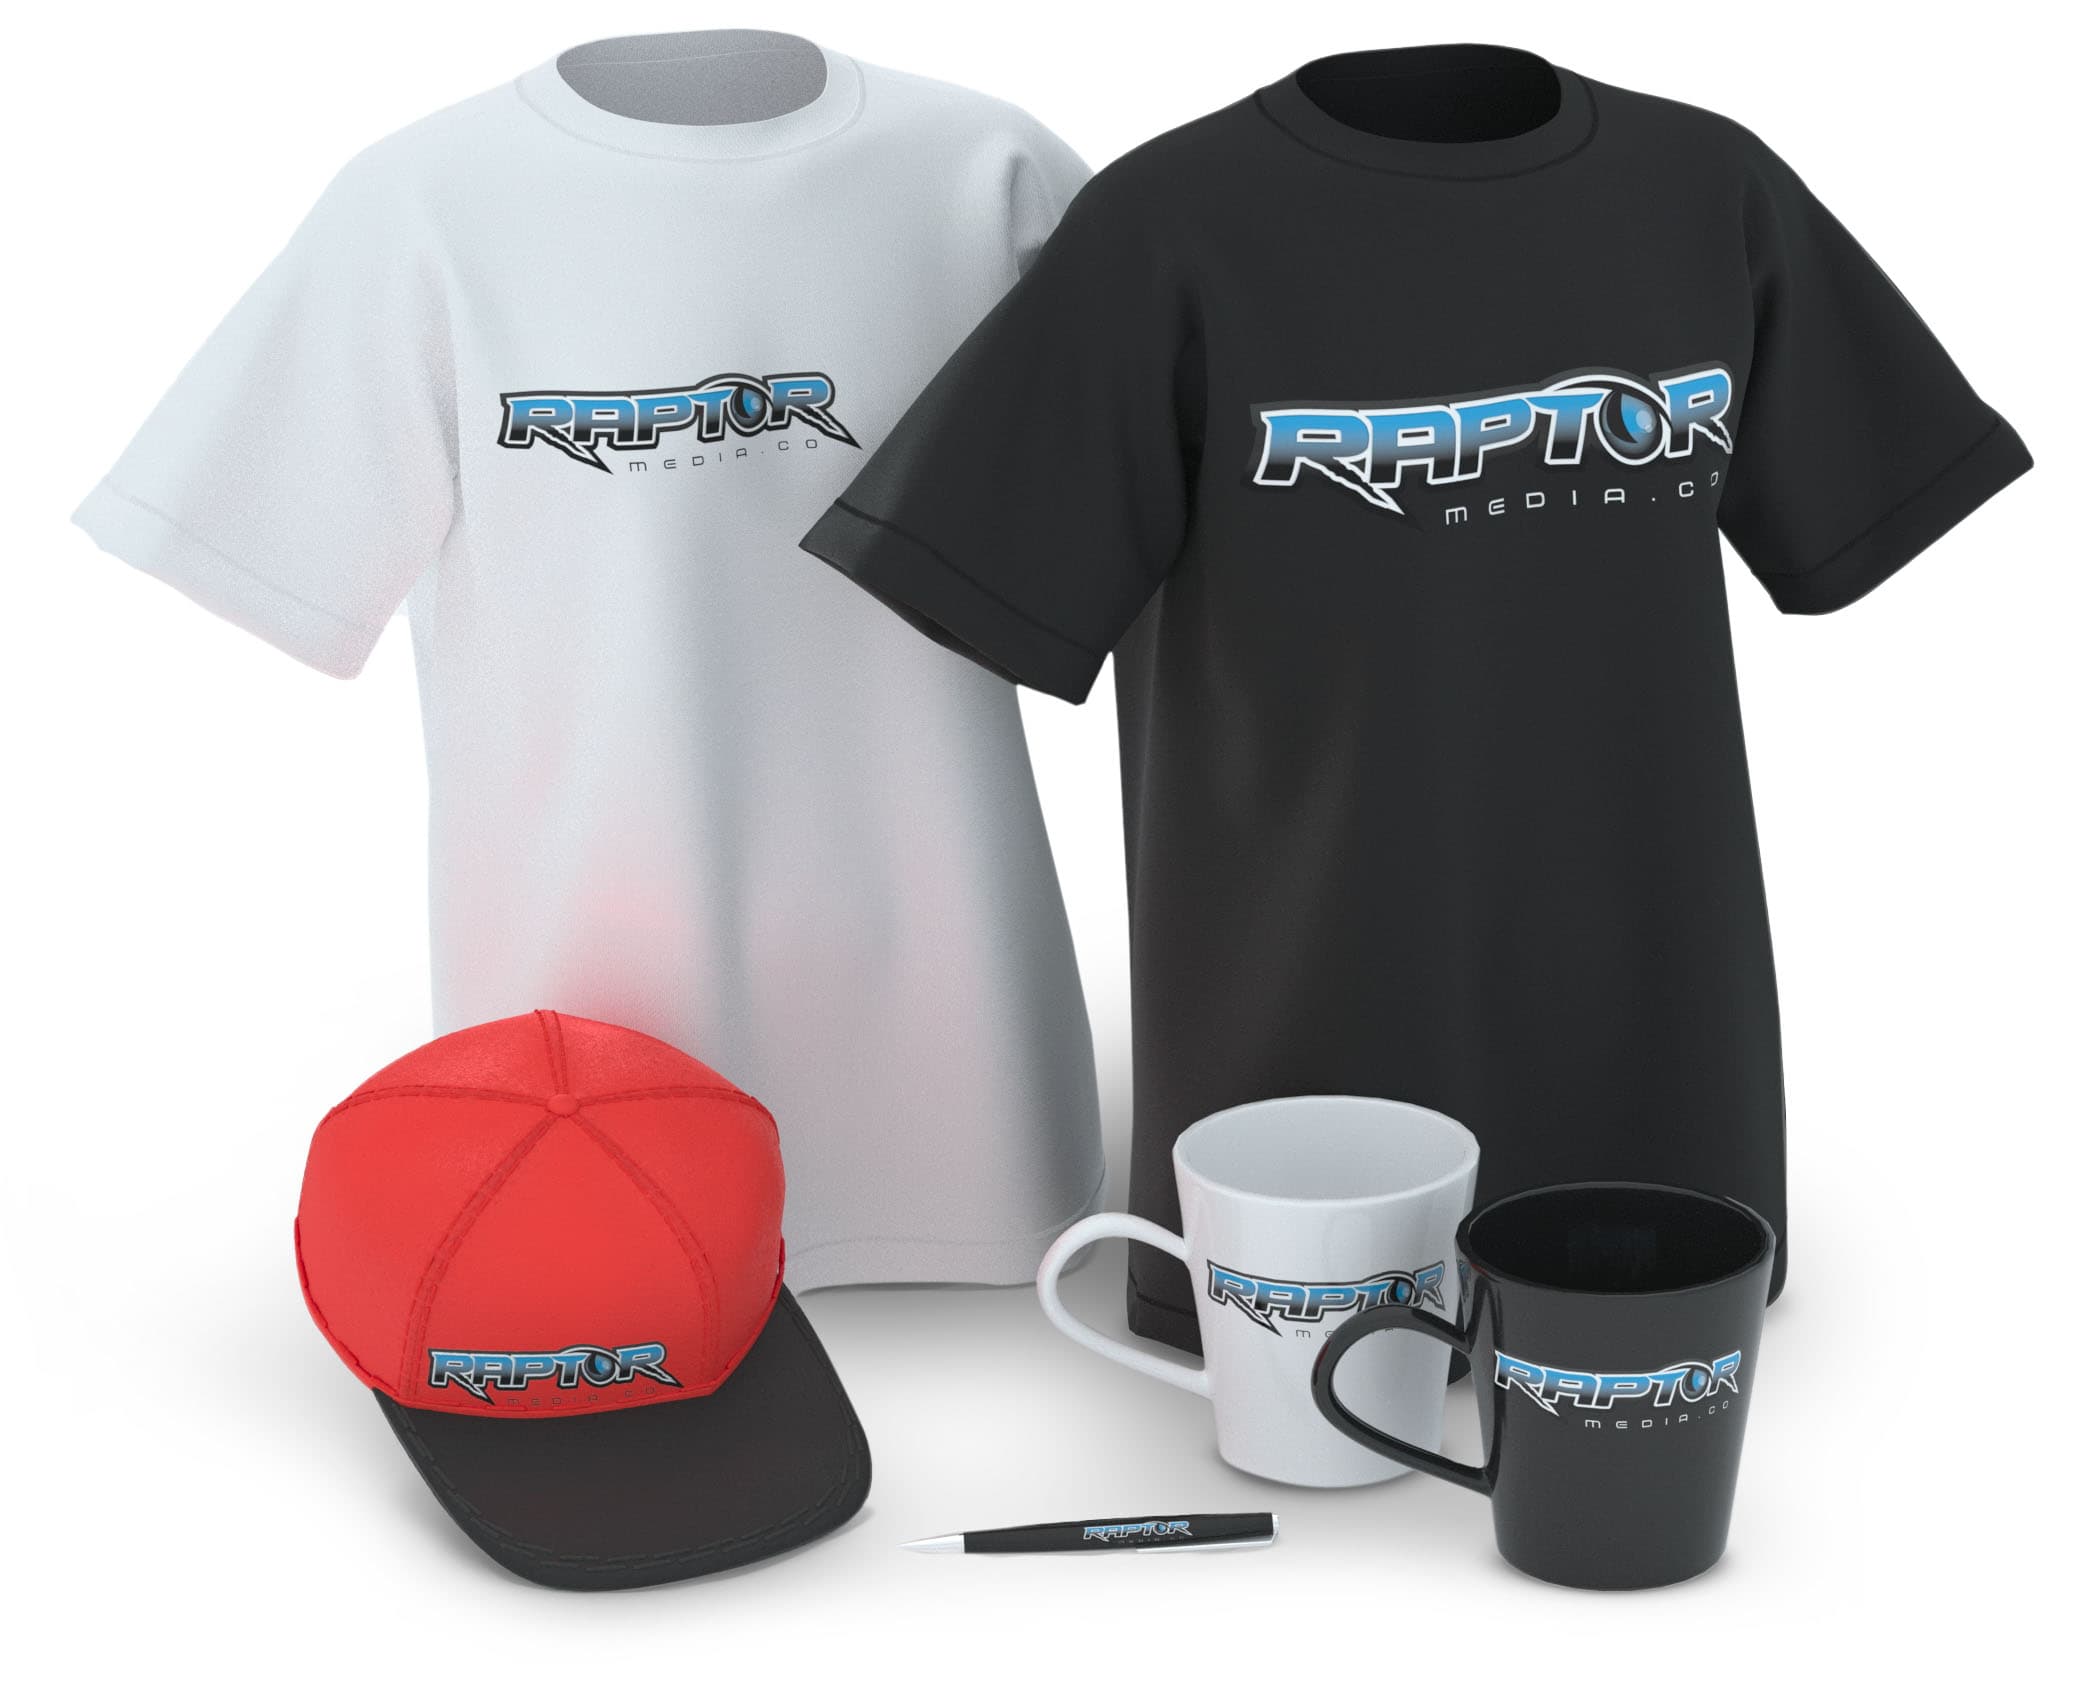 Business Branded Apparel and Promotional Items